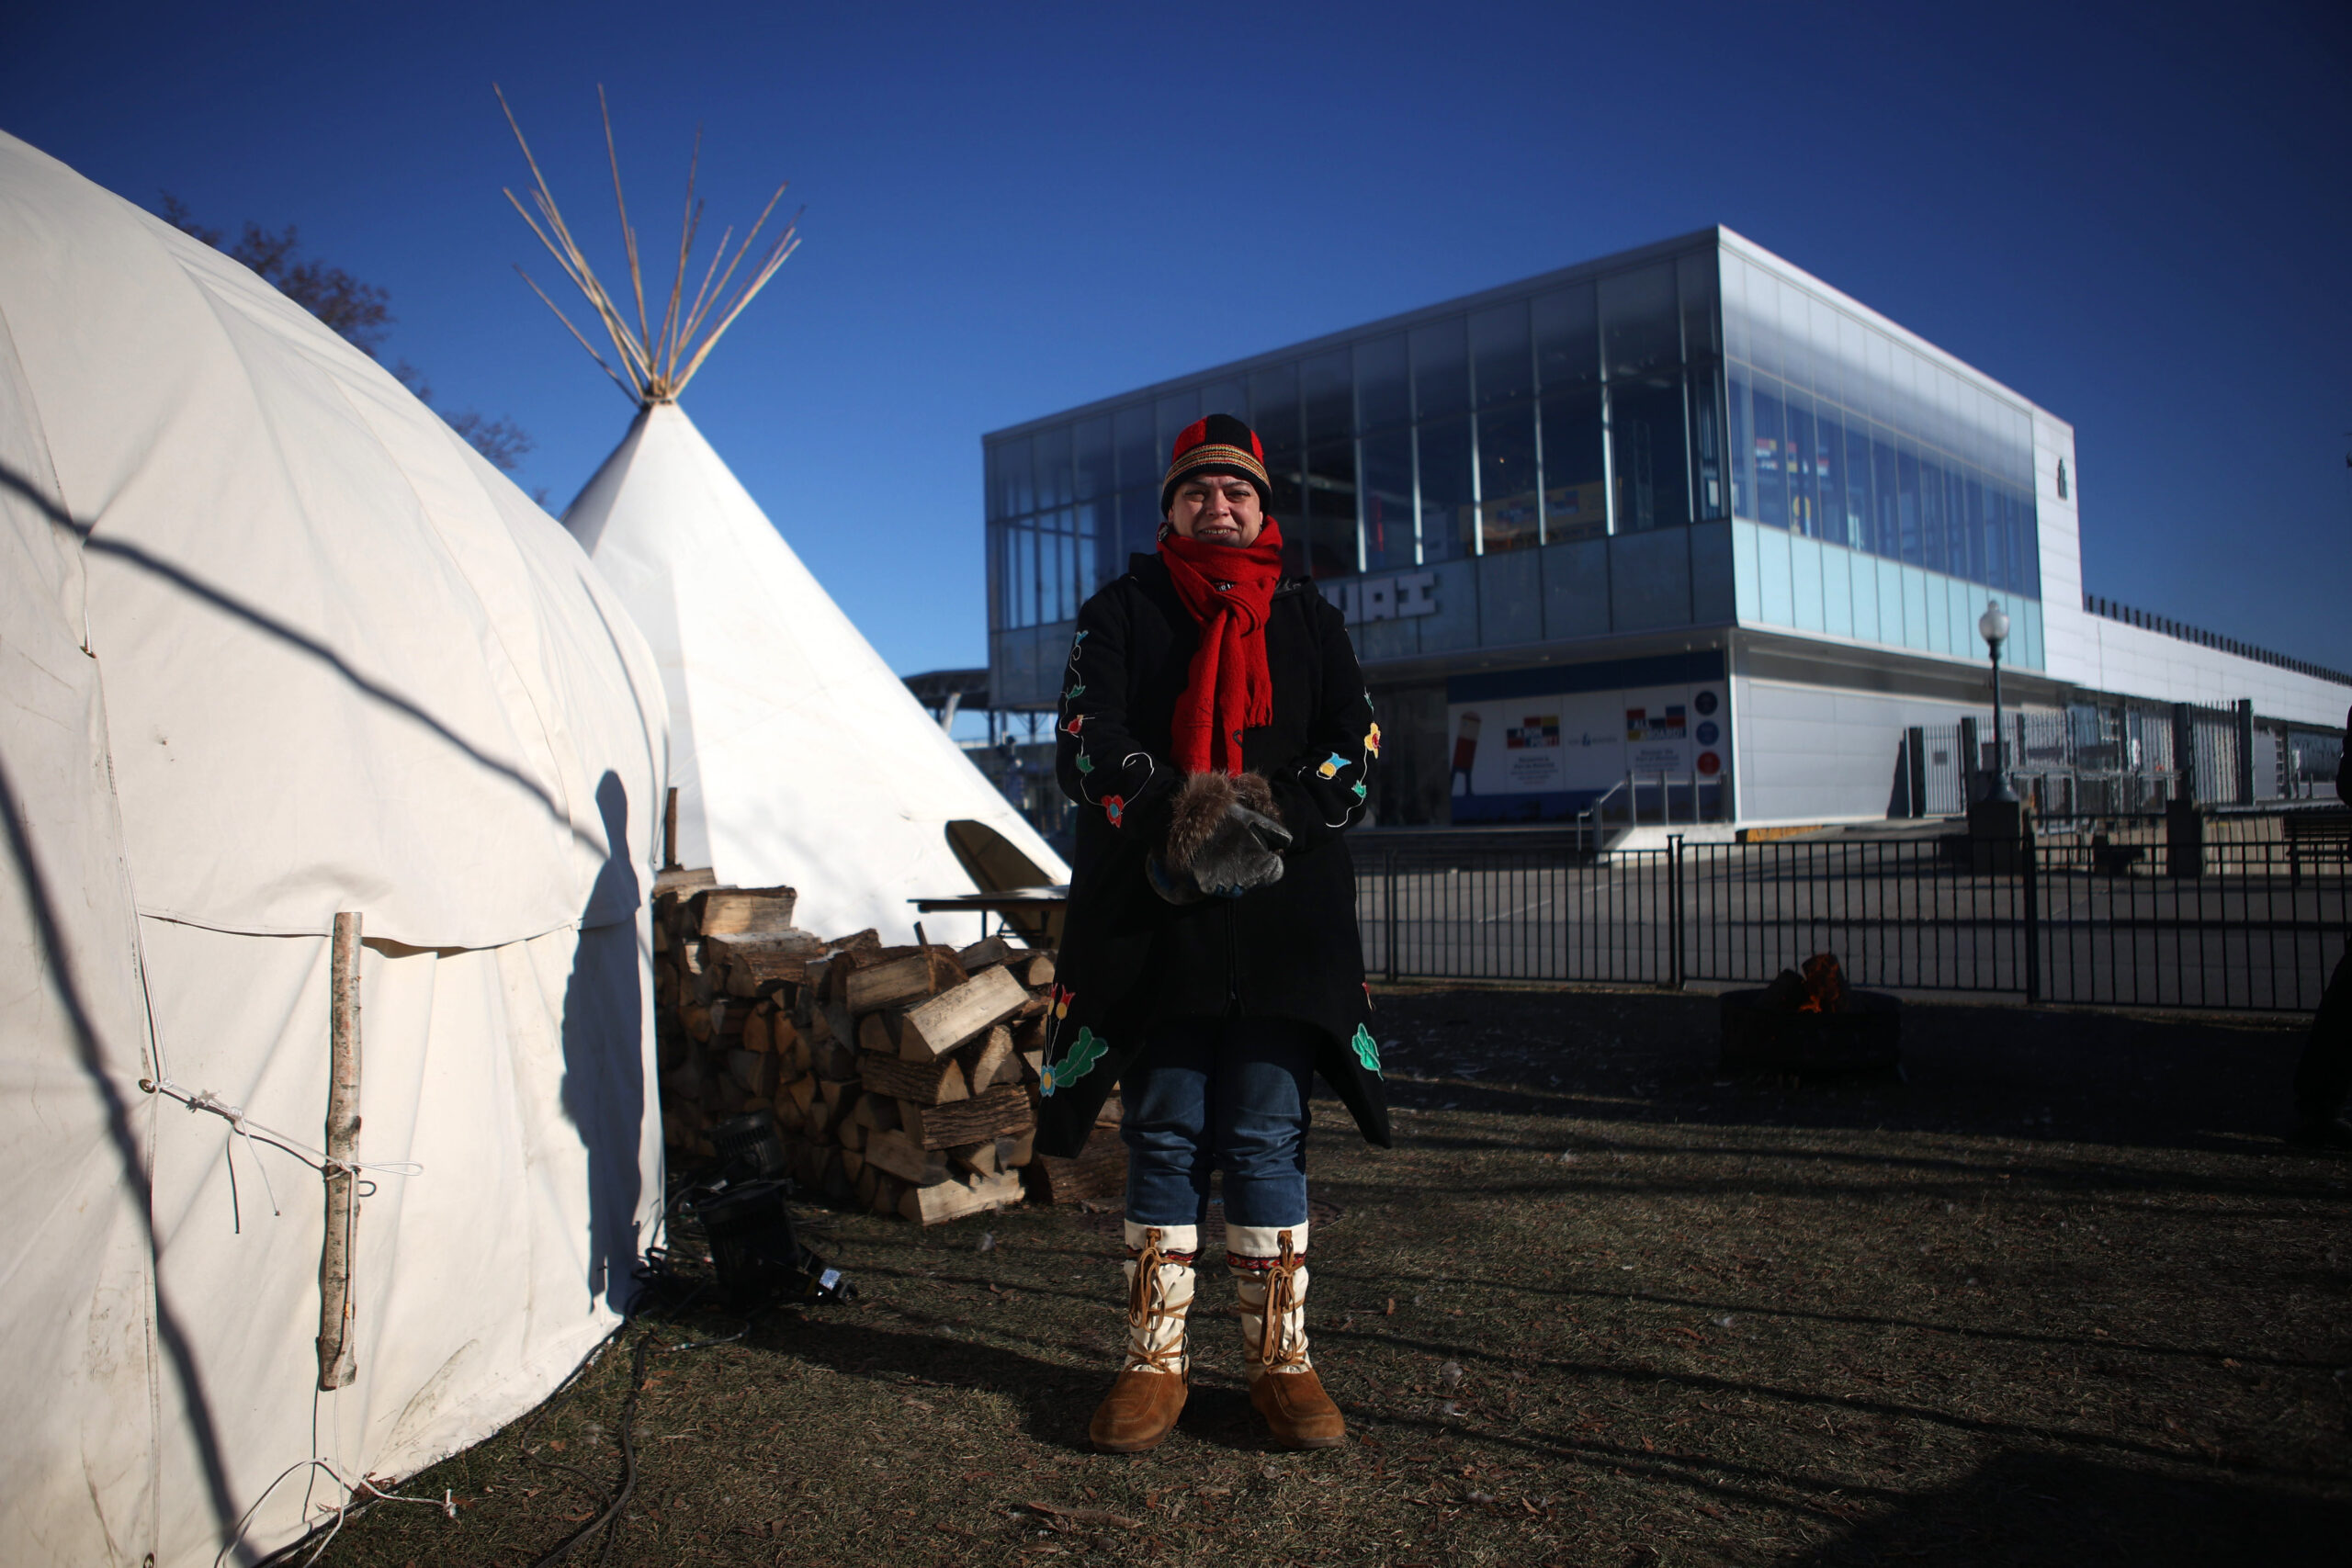 Valérie Courtois at COP15 in the Indigenous Village, bundled up in a red scarf and tuque on a sunny winter day.